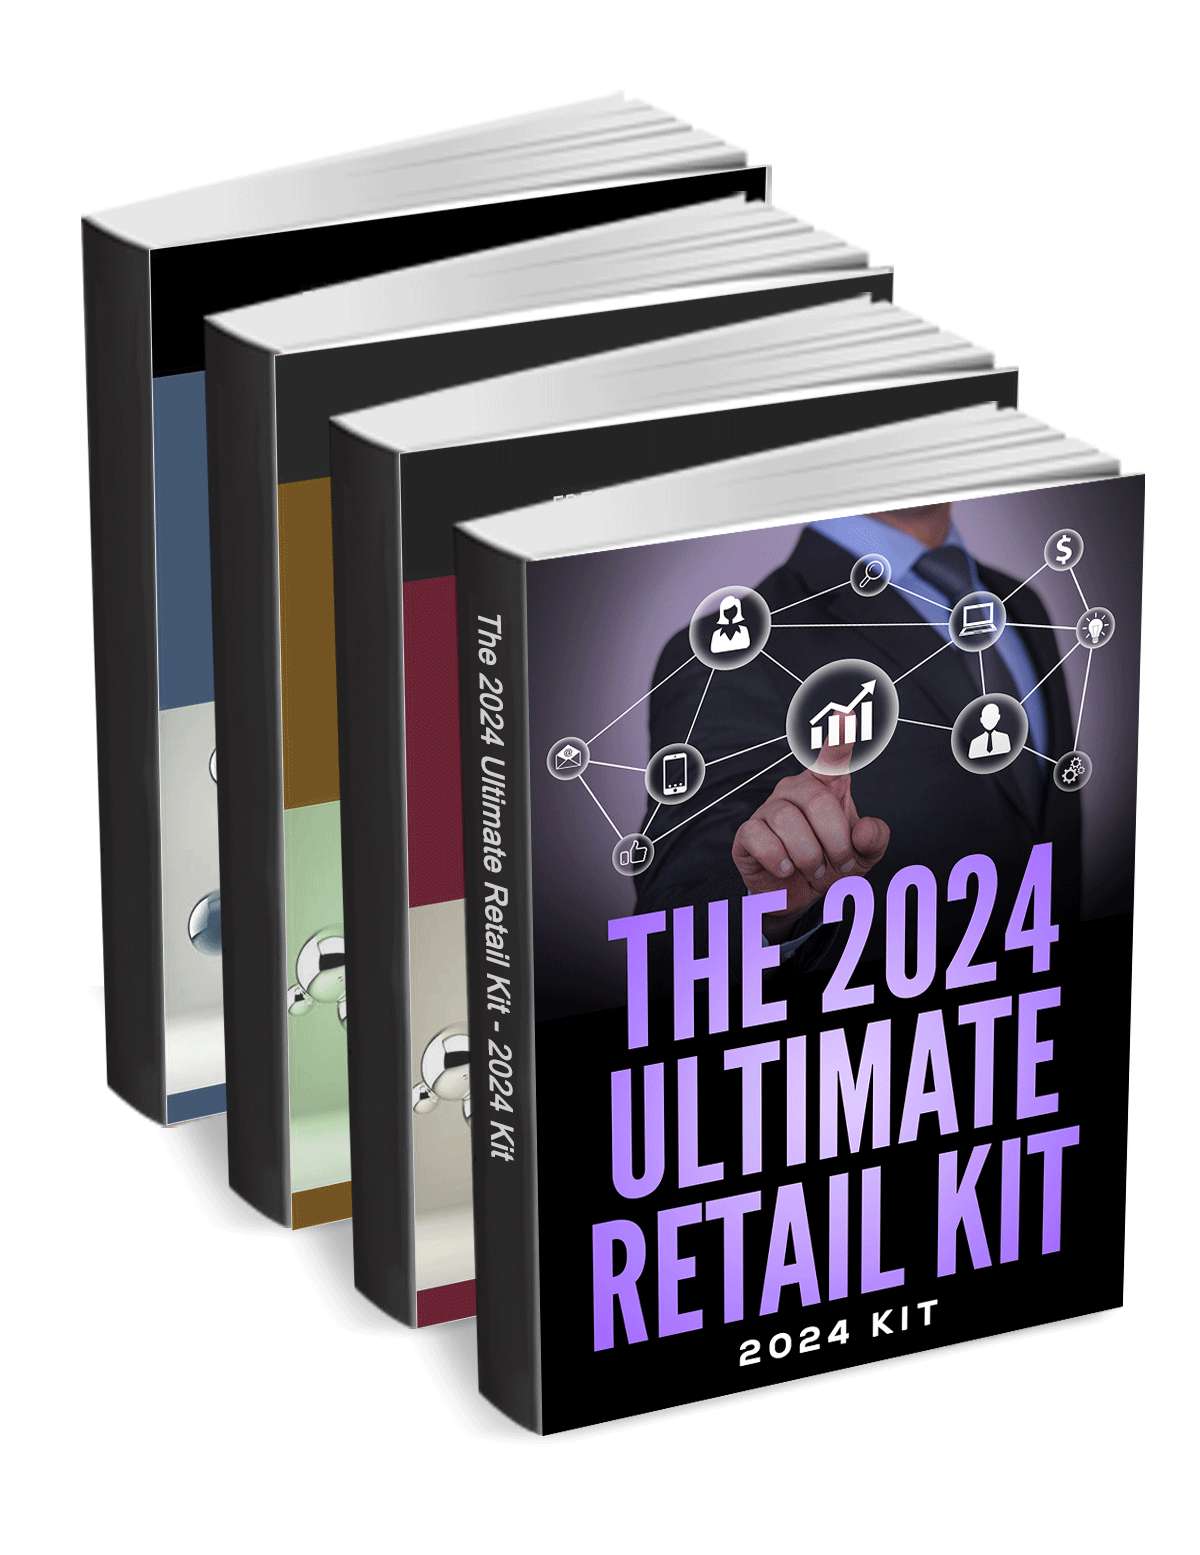 The 2024 Ultimate Retail Kit